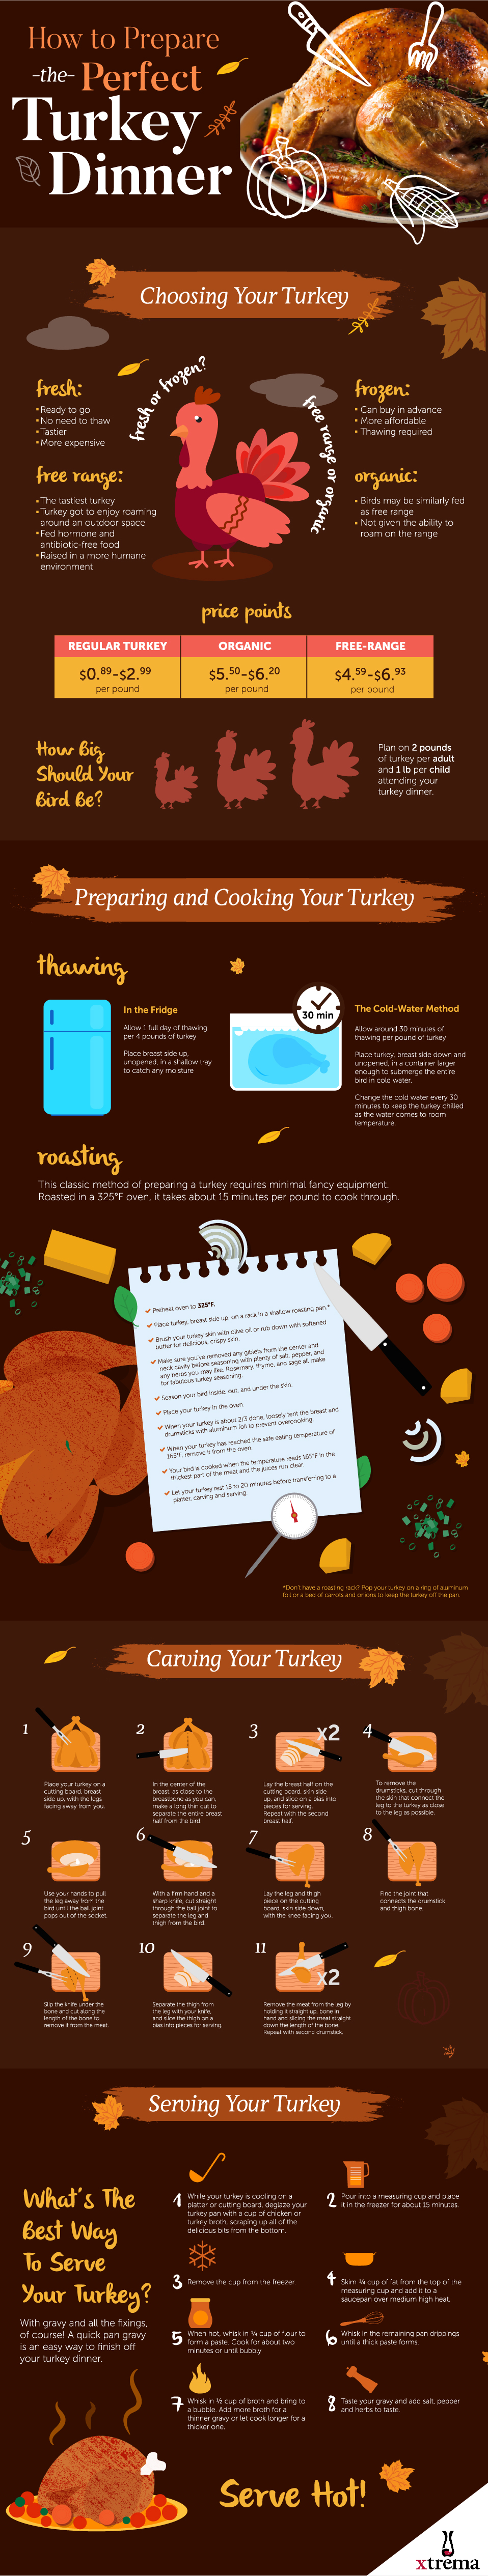 How to Prepare the Perfect Turkey Dinner Infographic